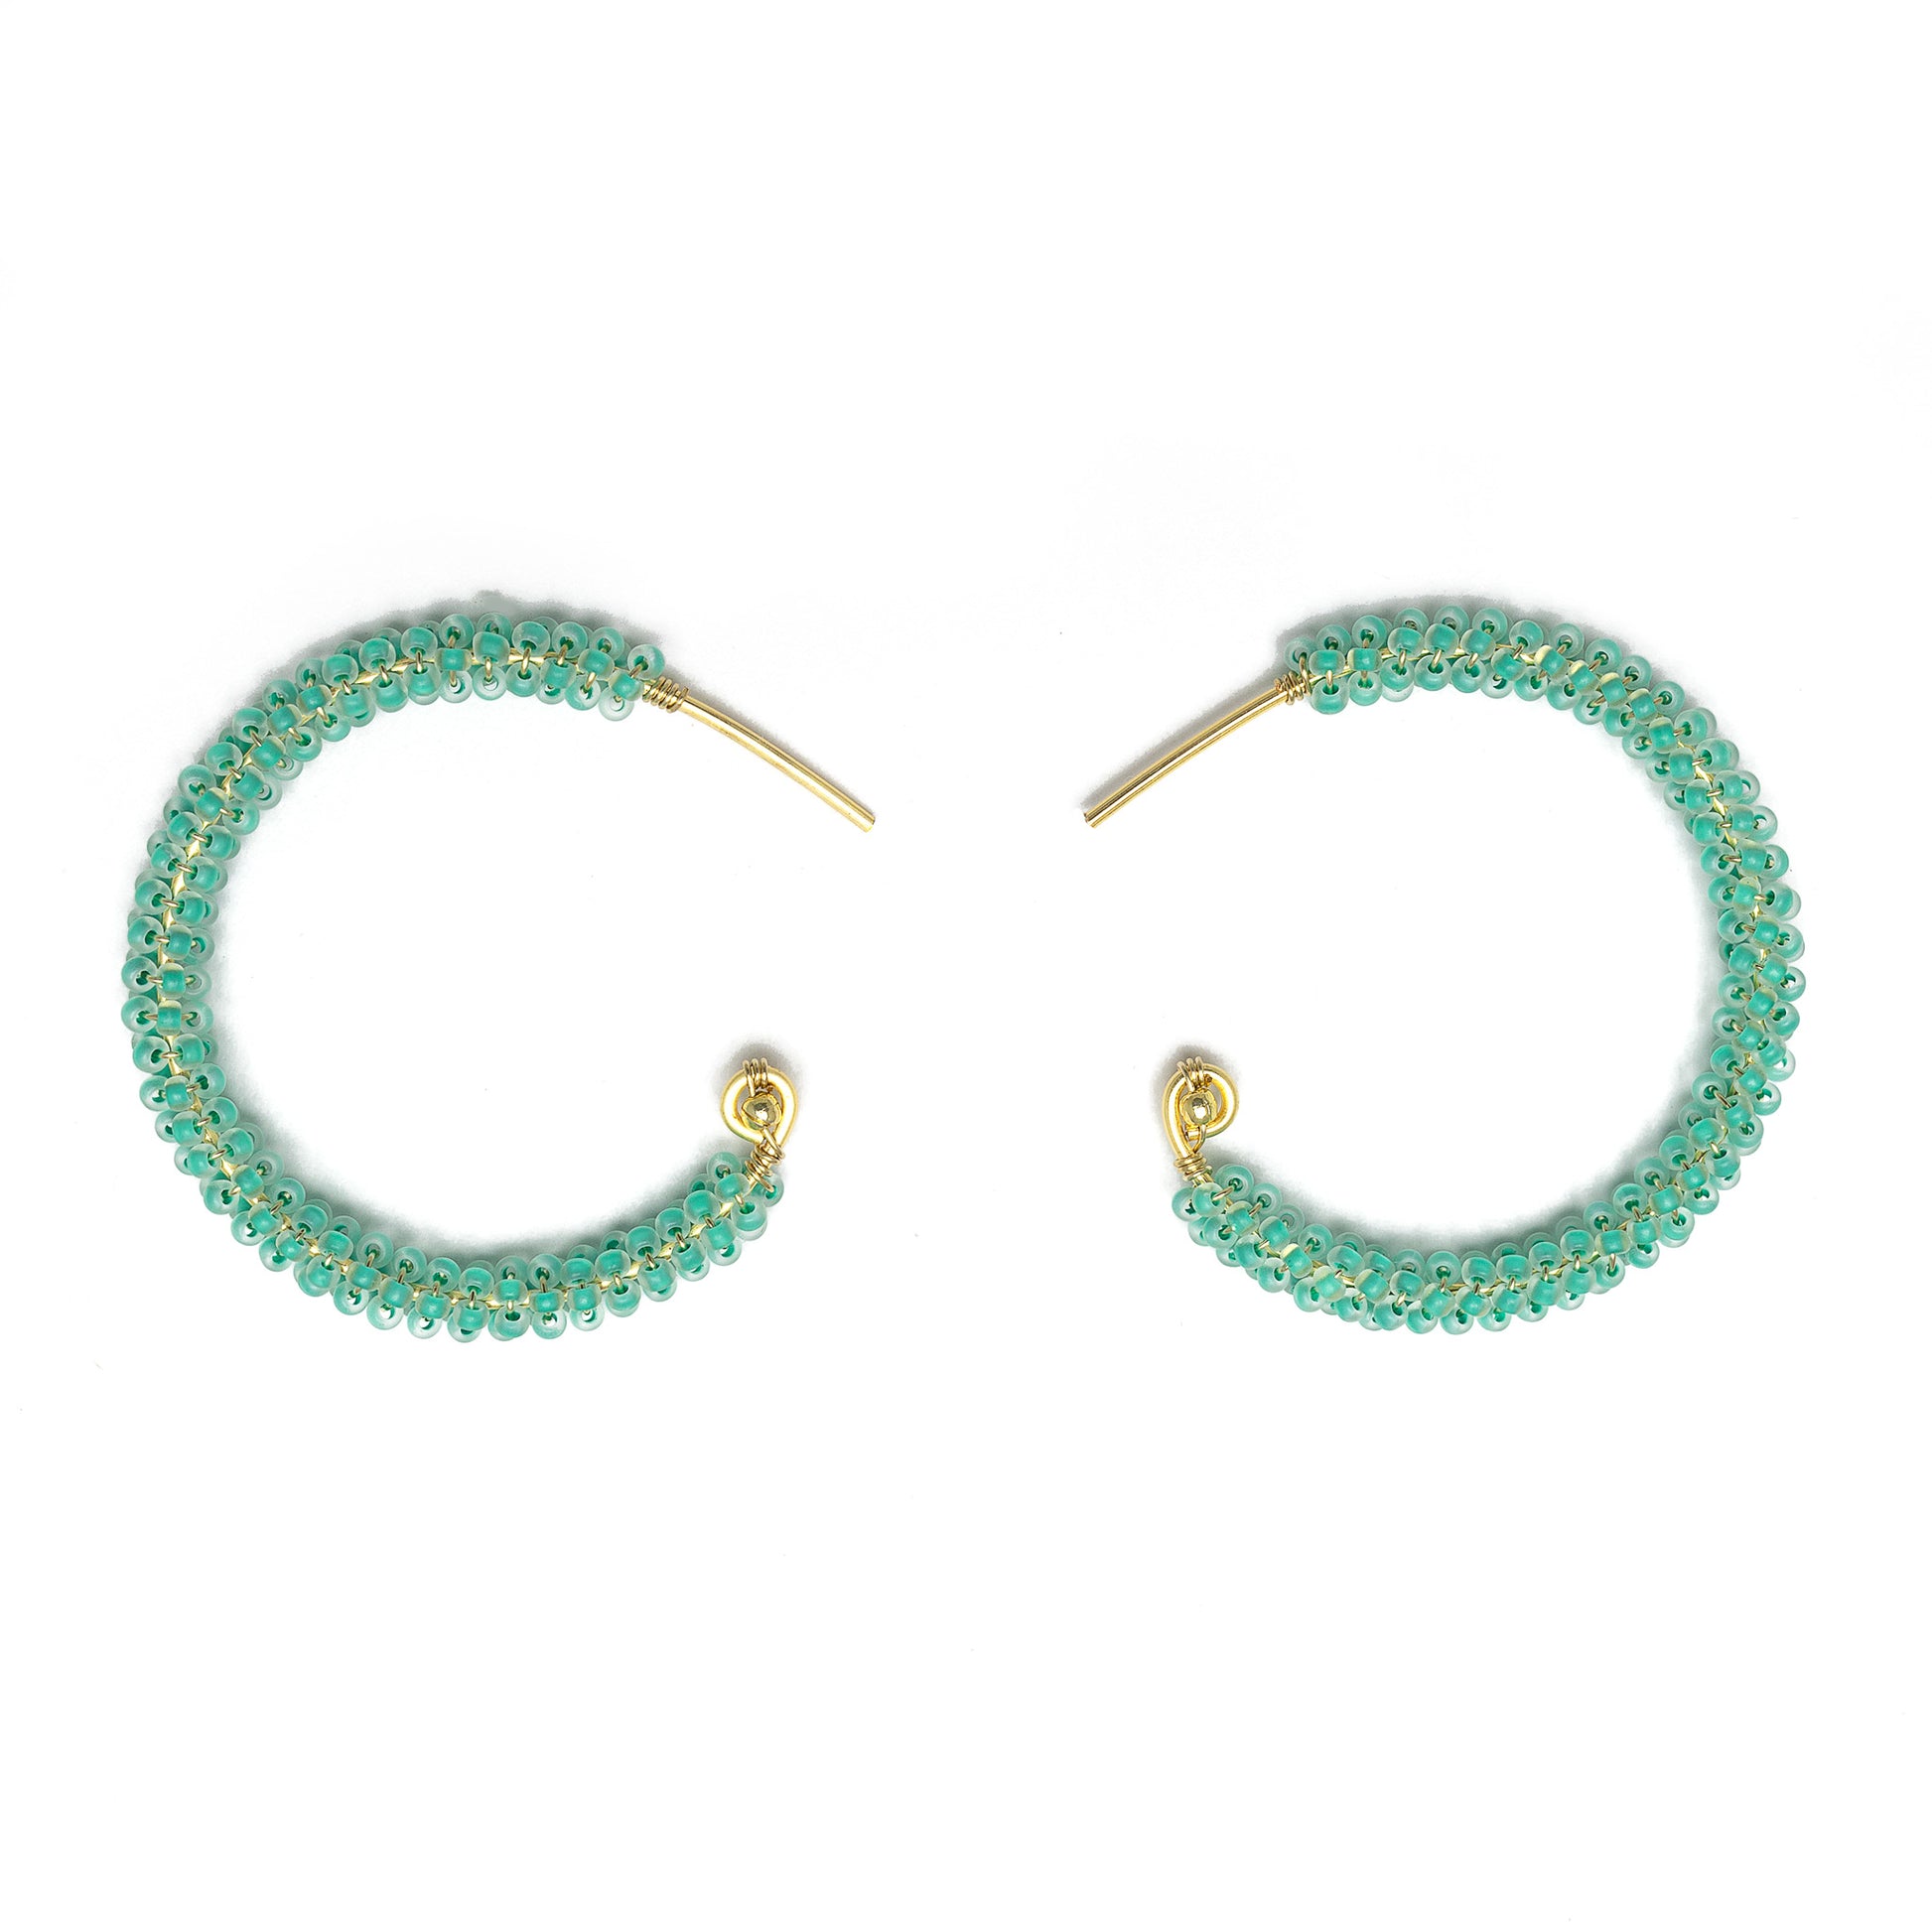 Florence gold Hoop Earrings are 1.5 inches long, Gold and Aqua Earrings. Wire Wrapped Earrings. Lightweight and comfortable earrings. Handmade for women. Open hoop earrings.